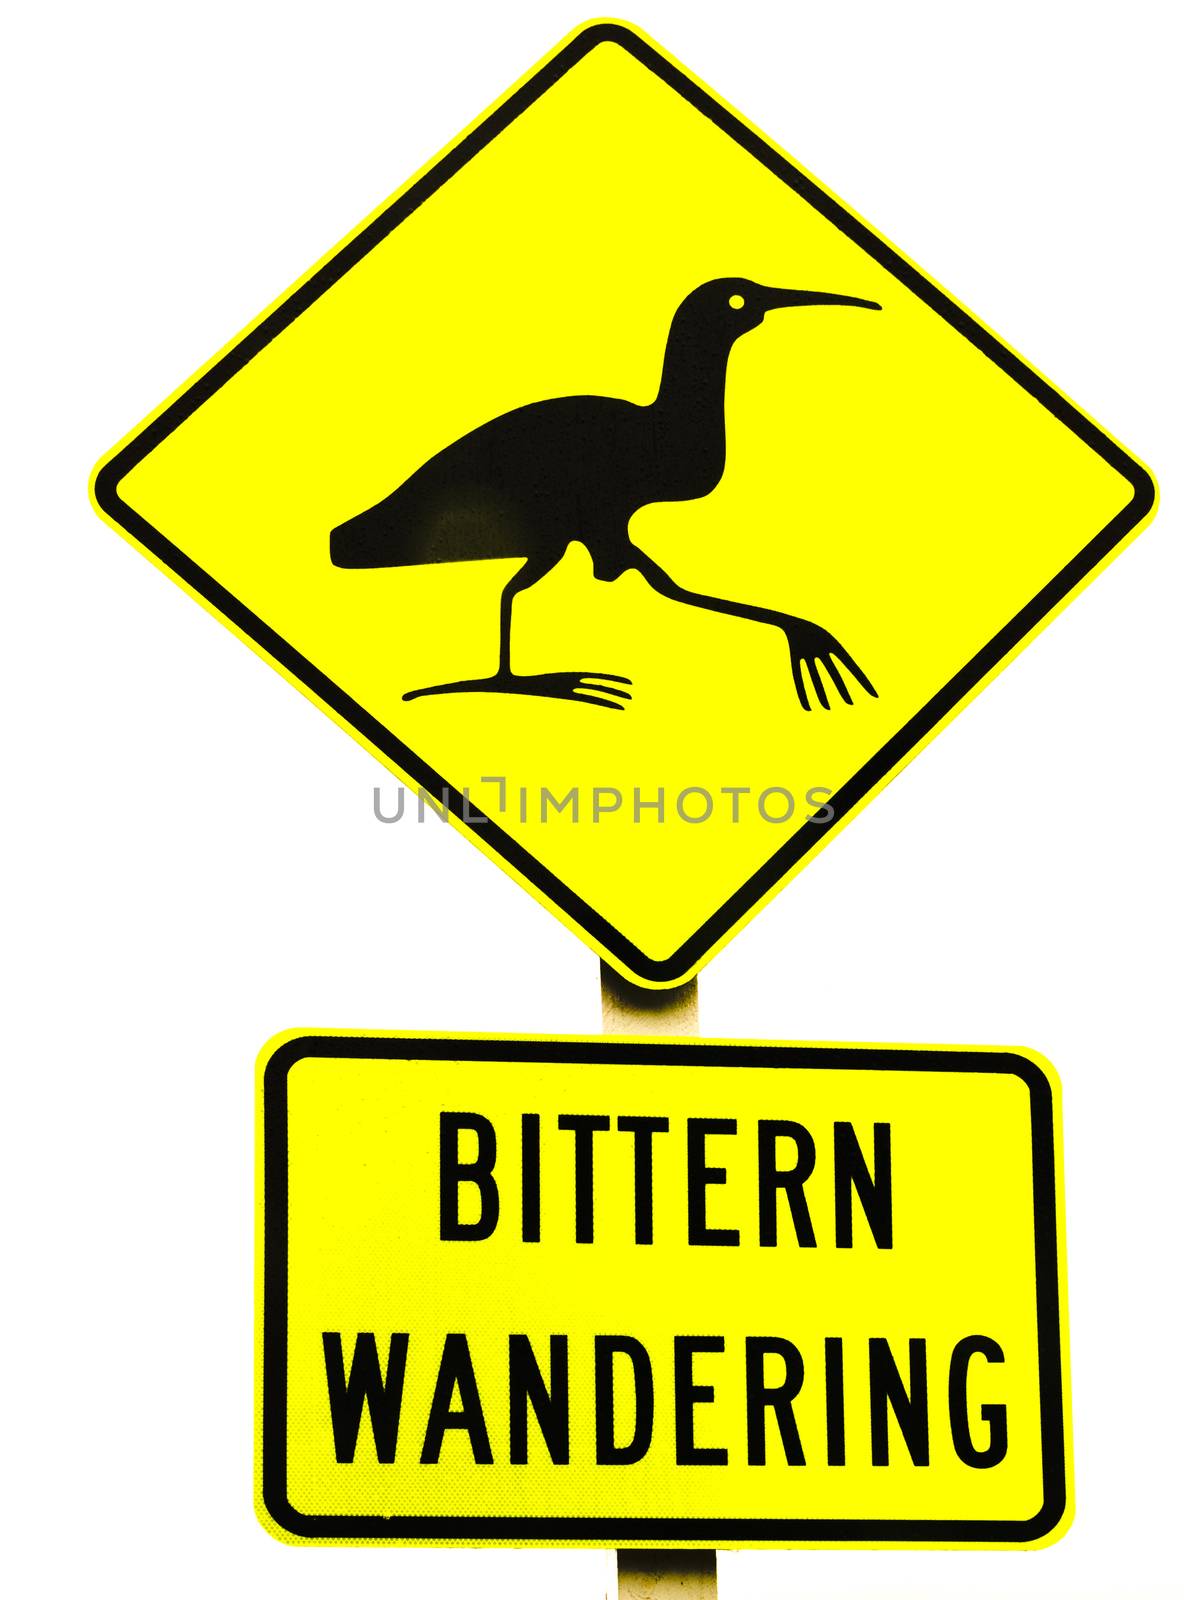 New Zealand Road Sign: Attention Bittern Crossing isolated on white background